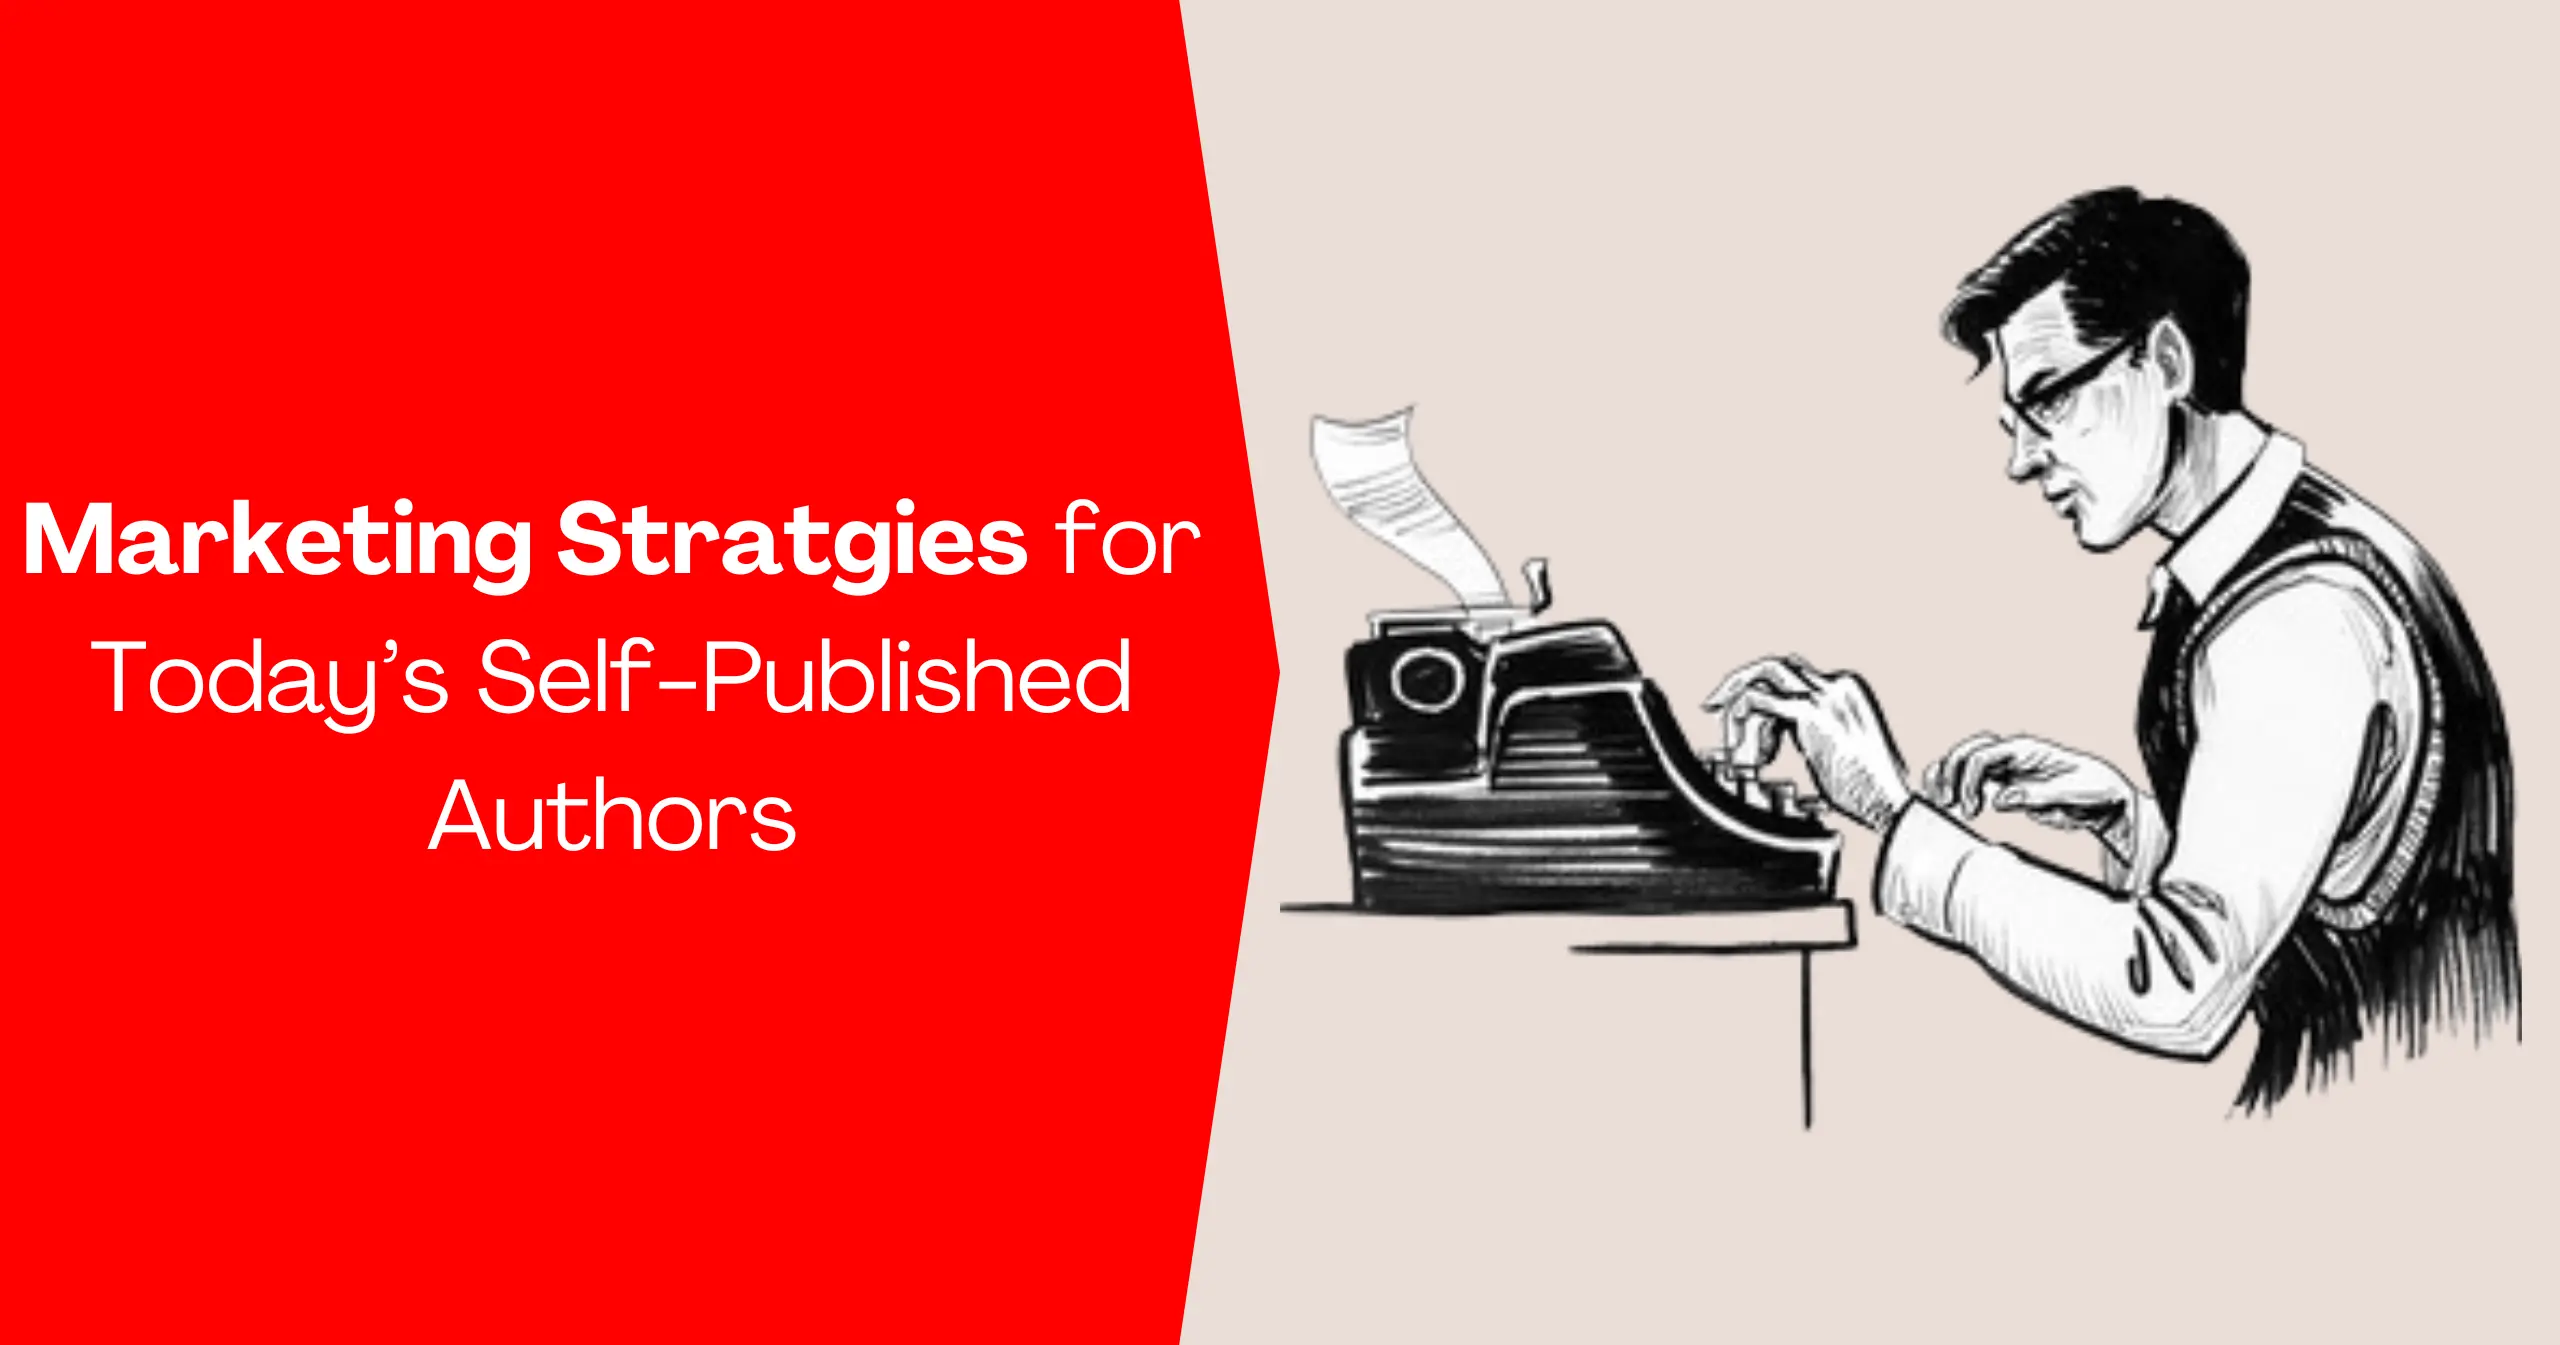 Marketing Strategies for Today’s Self-Published Authors